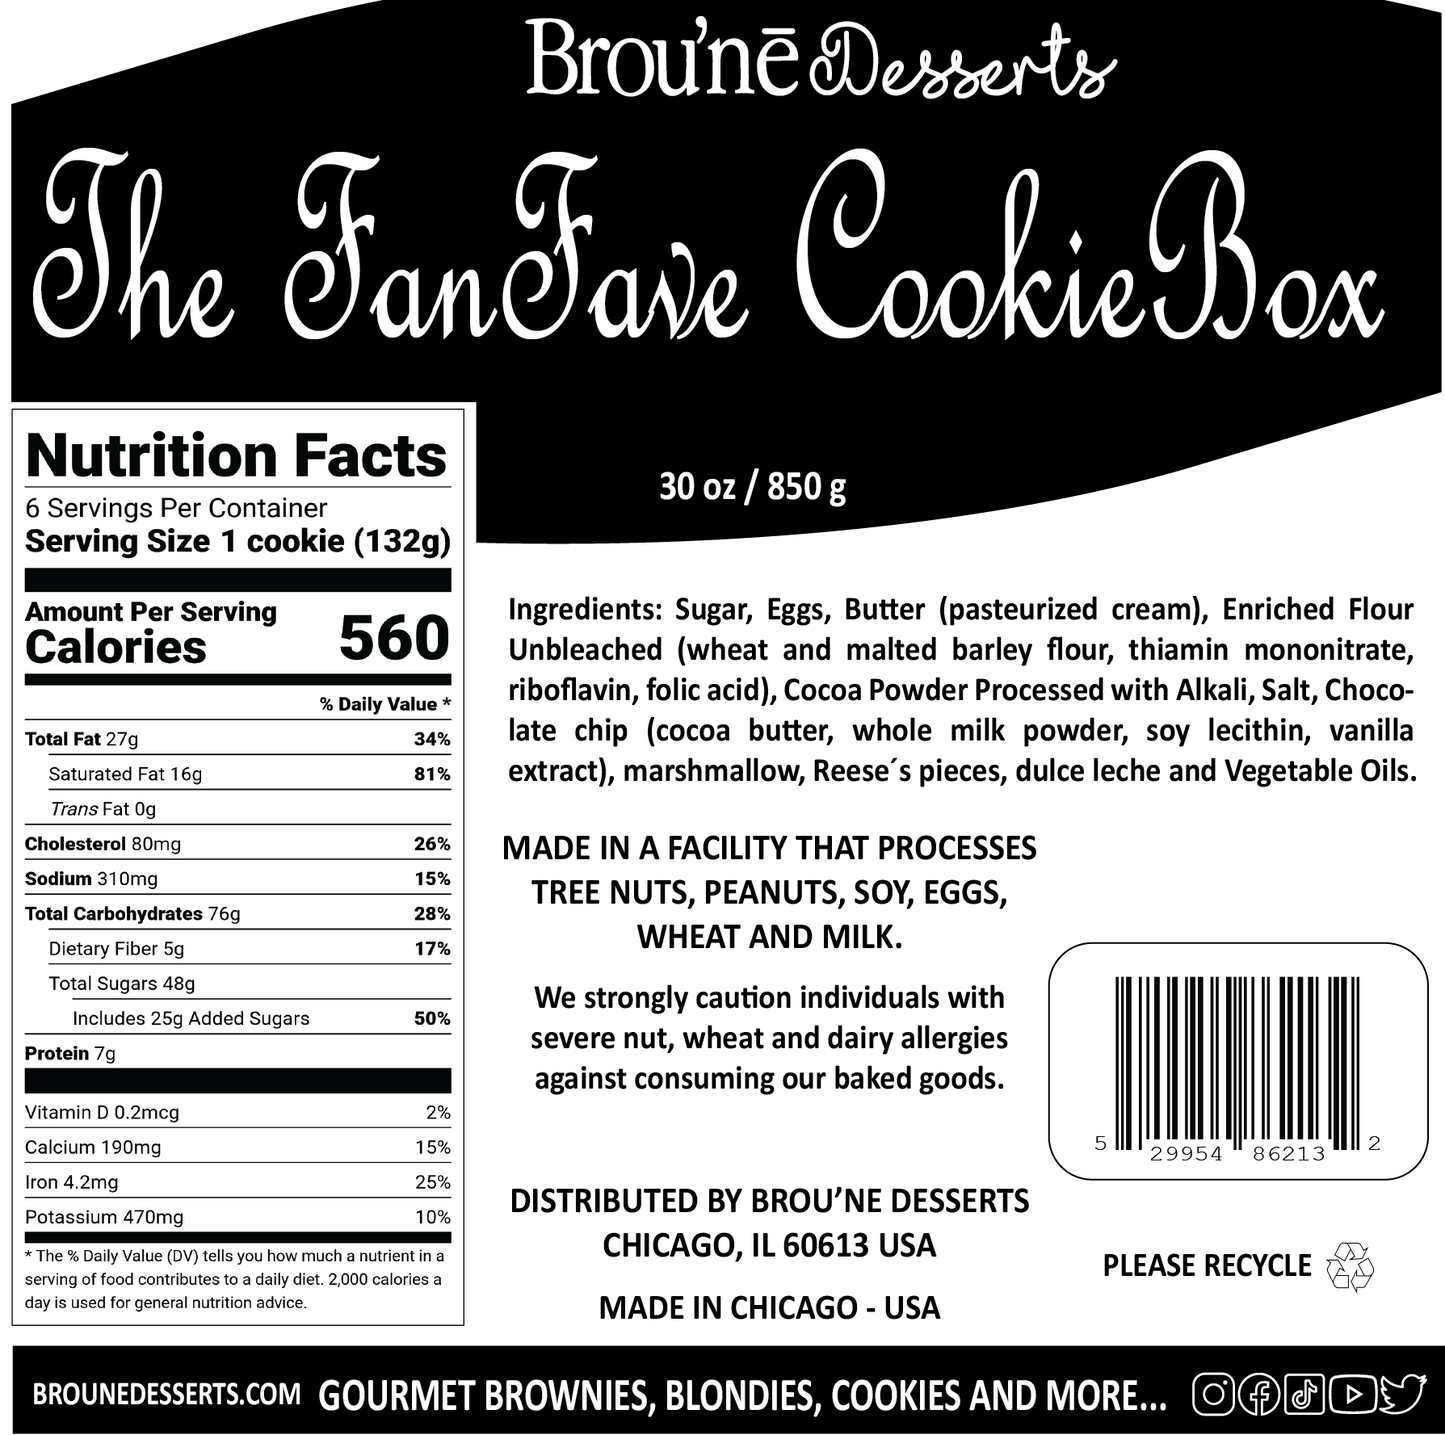 The Fan Fave Cookie Box